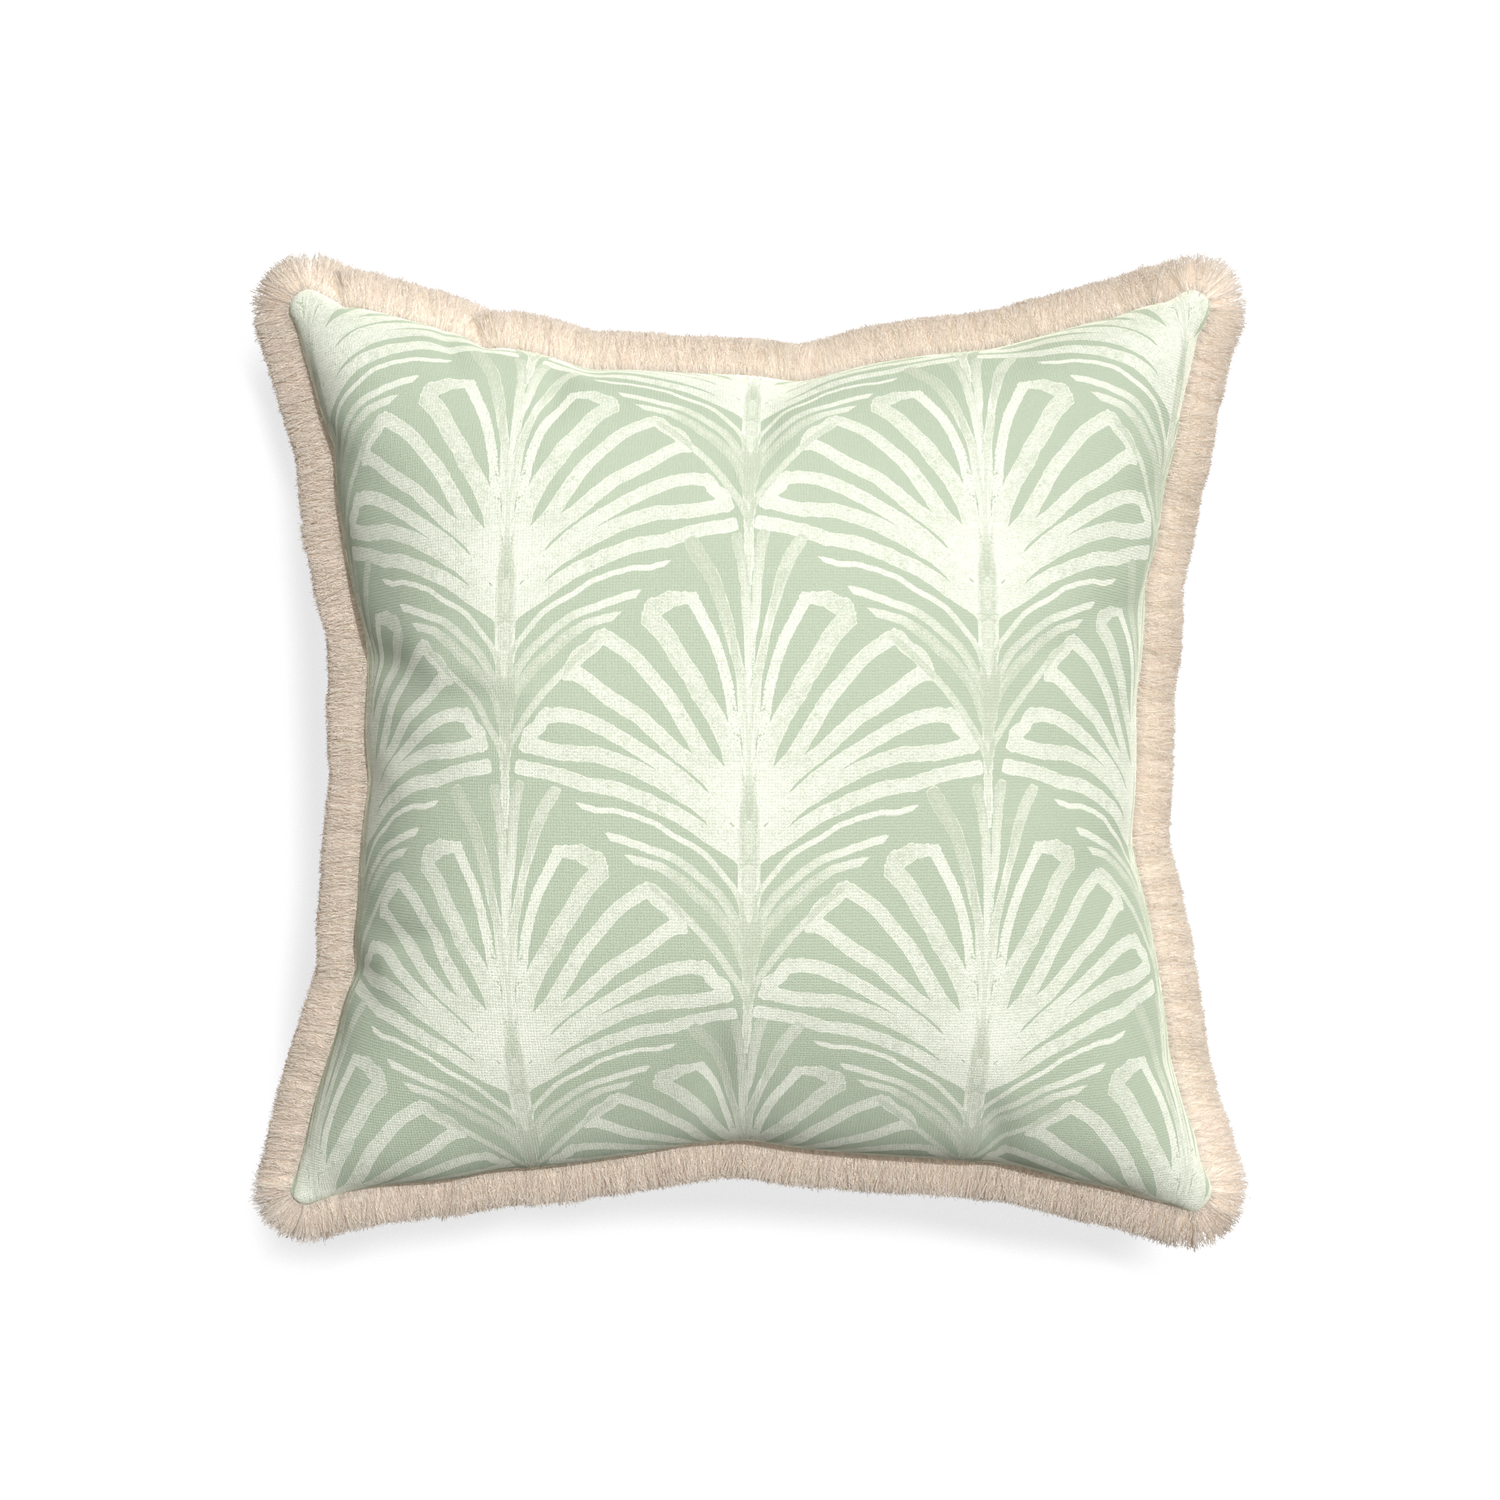 20-square suzy sage custom sage green palmpillow with cream fringe on white background